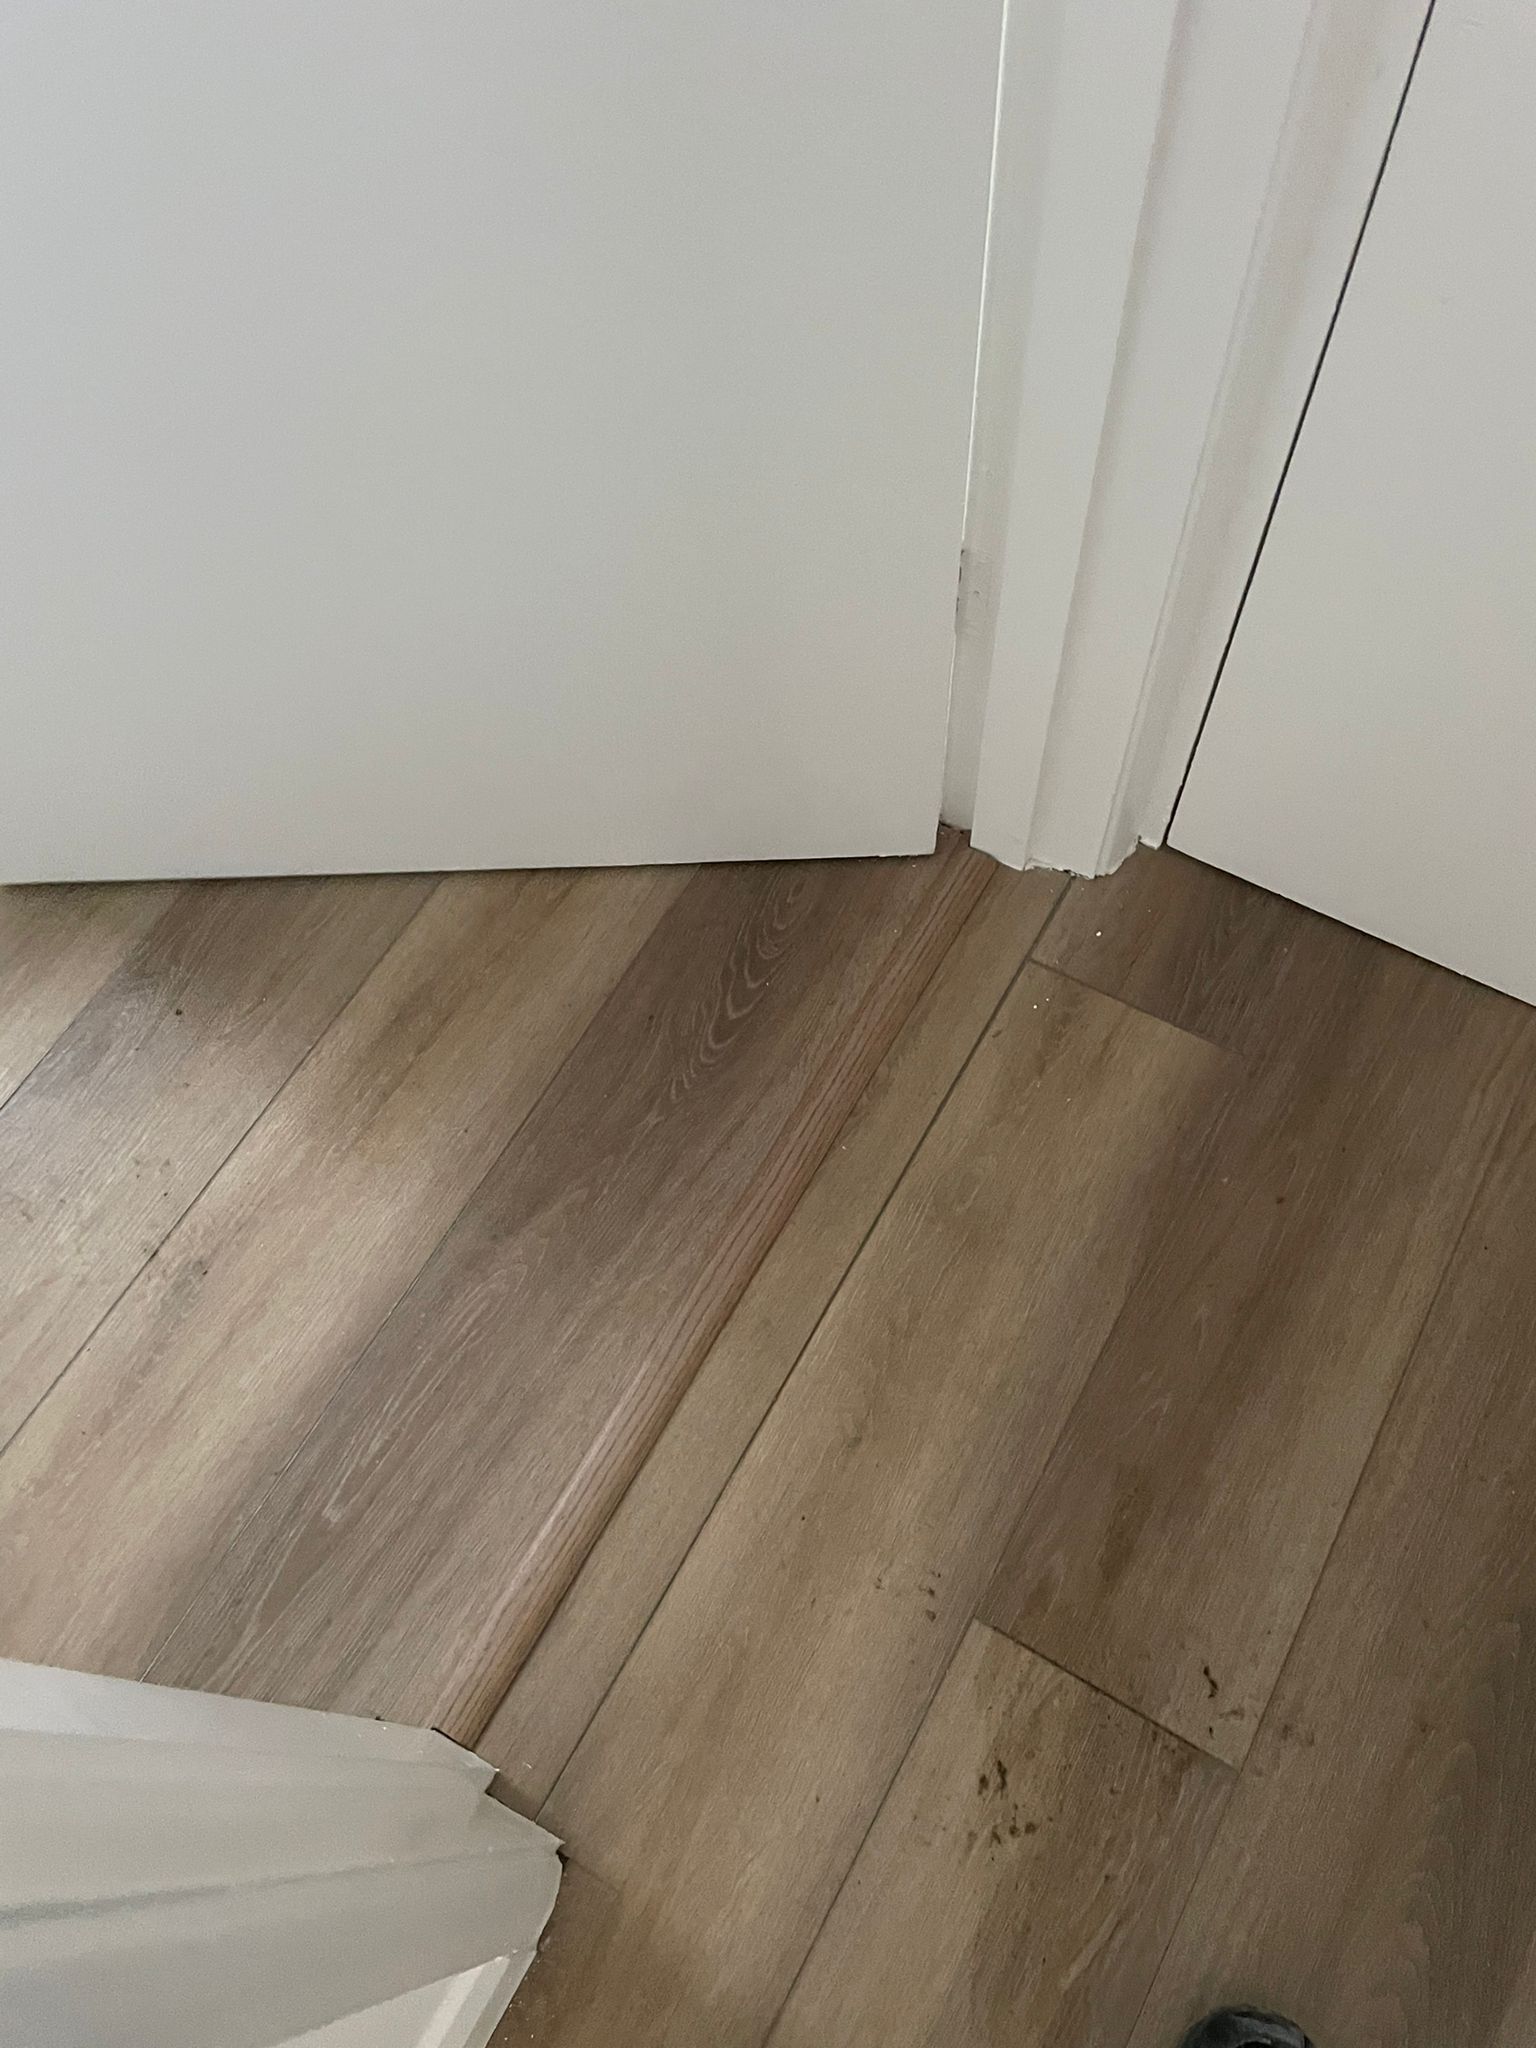 Installed high-quality flooring materials